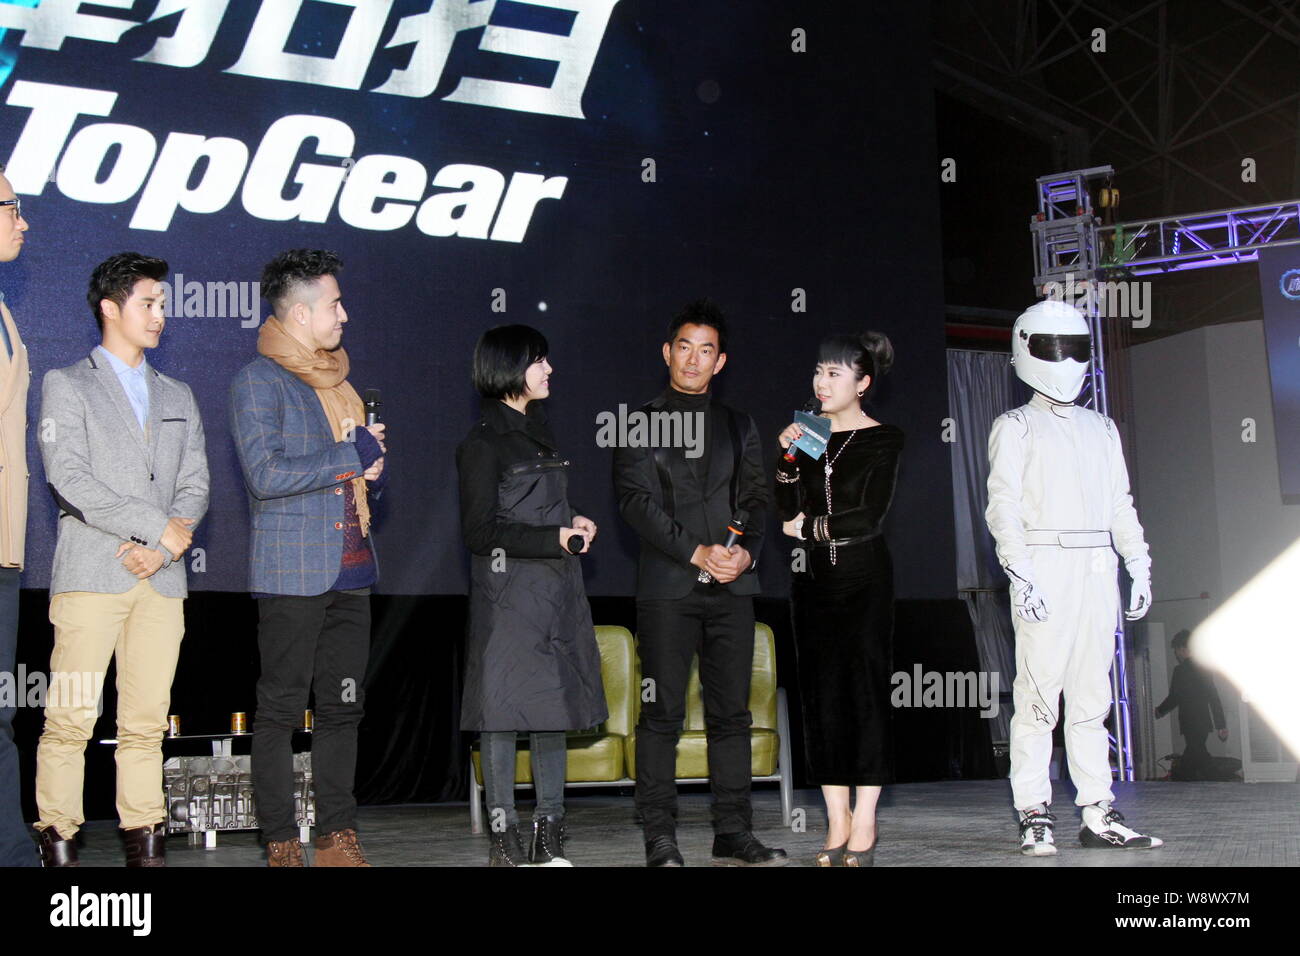 Taiwanese singer and actor Richie Jen, third right, is interviewed at the launch event for the reality TV show 'Top Gear' in Shanghai, China, 12 Novem Stock Photo